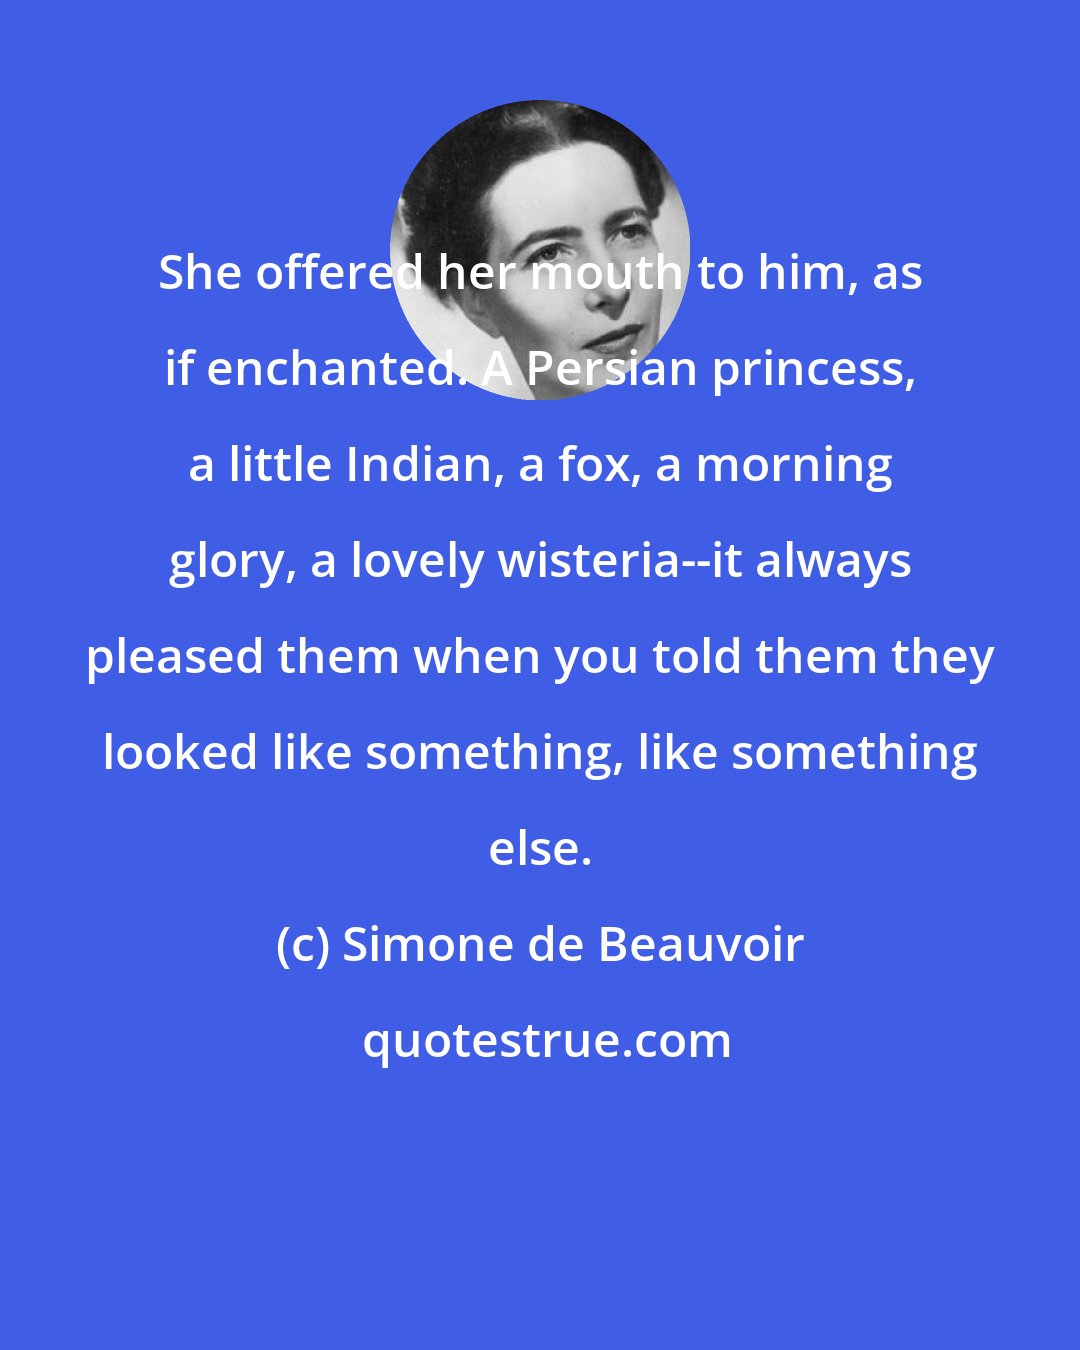 Simone de Beauvoir: She offered her mouth to him, as if enchanted. A Persian princess, a little Indian, a fox, a morning glory, a lovely wisteria--it always pleased them when you told them they looked like something, like something else.